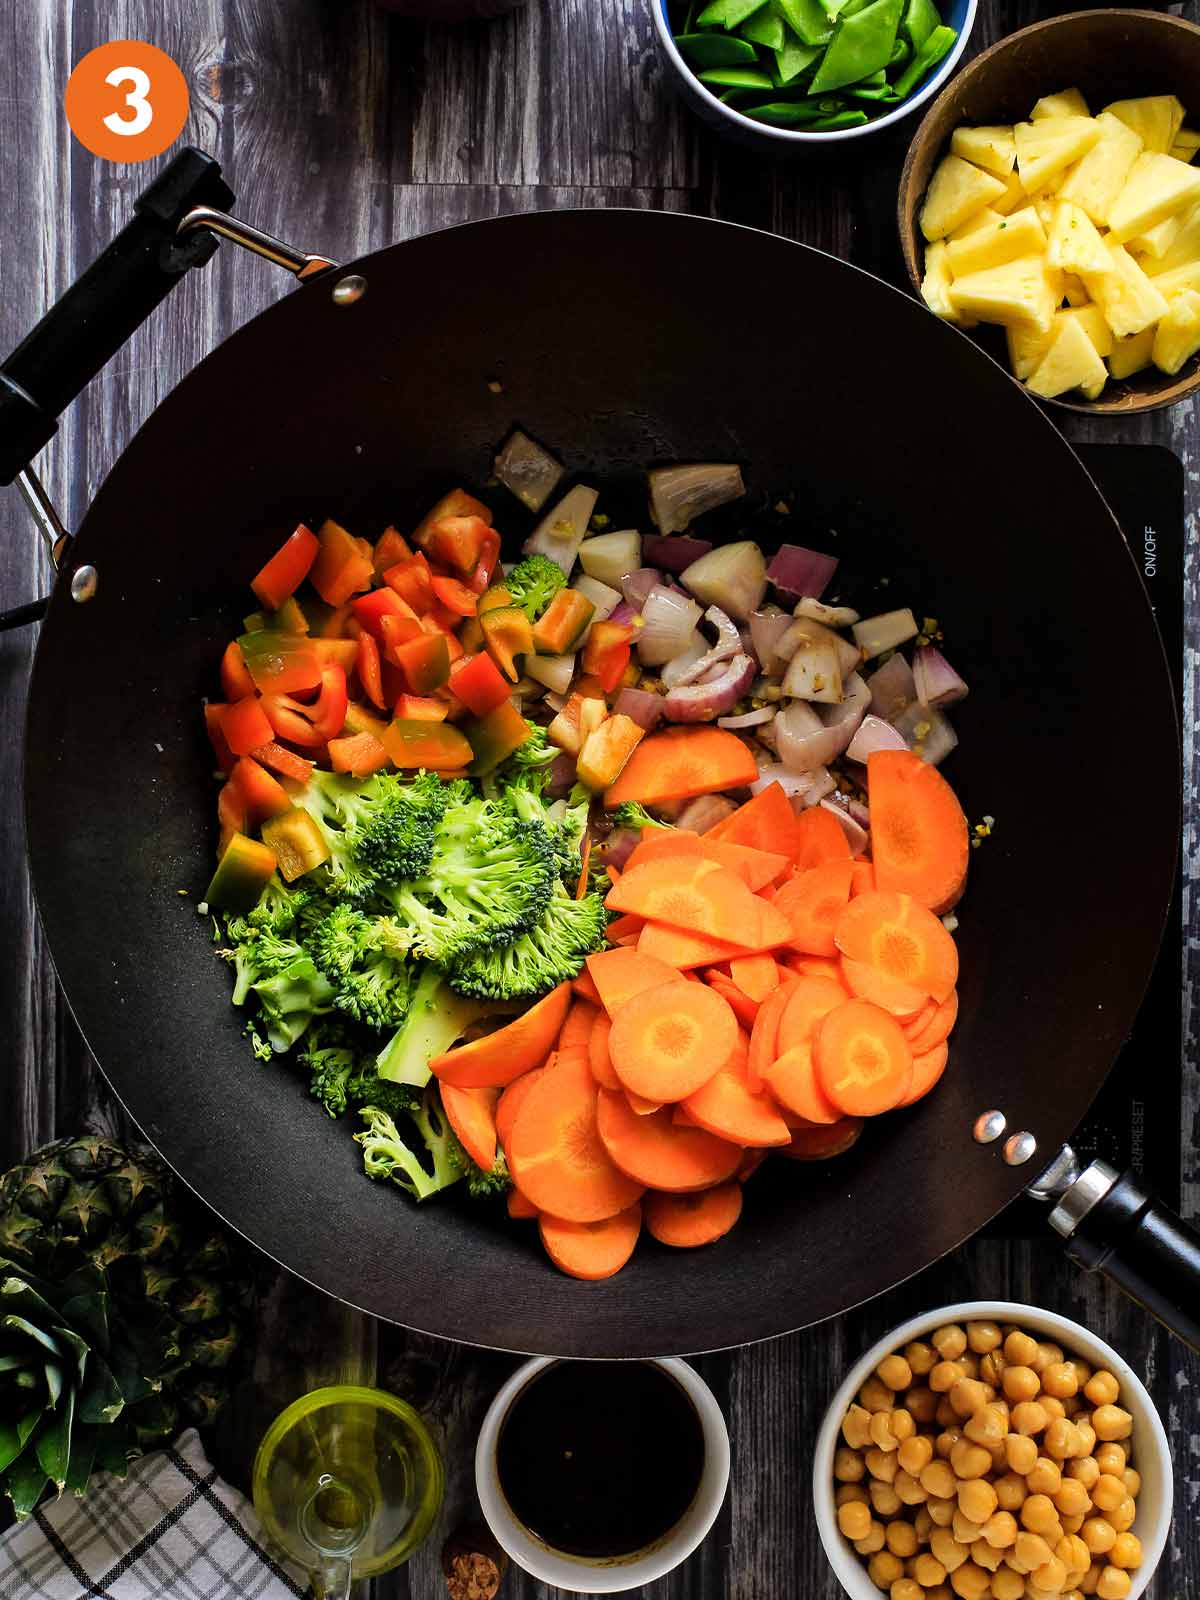 Broccoli and carrots added to the wok to cook.